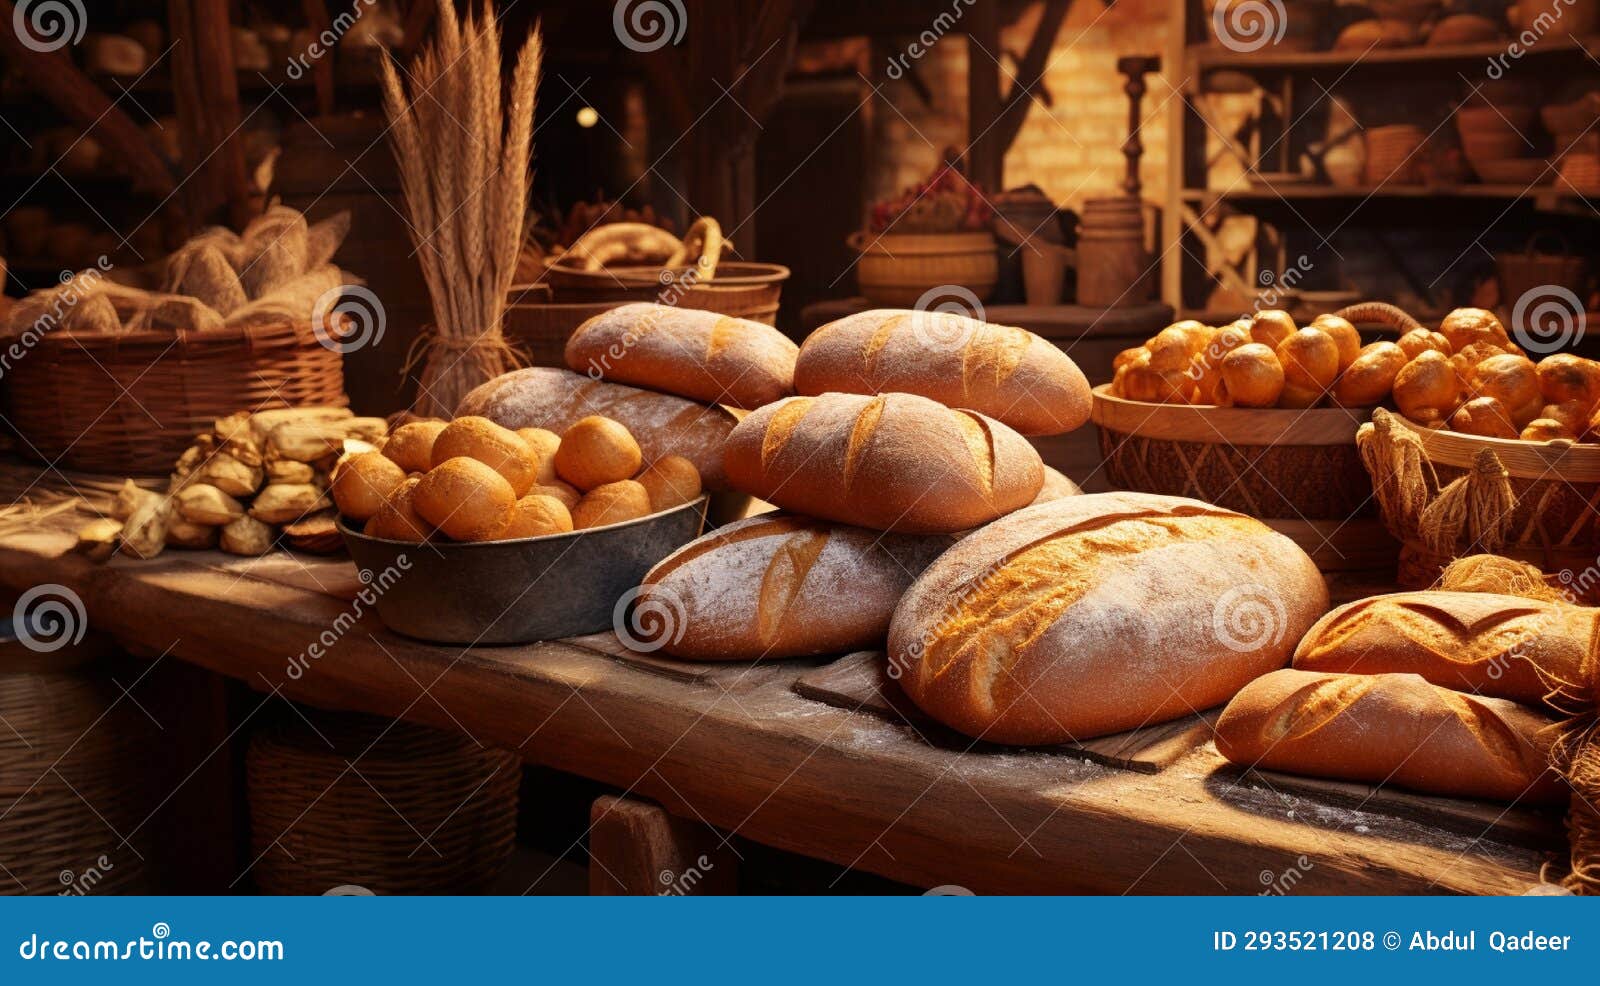 a traditional bakery, the aroma of freshly baked bread wafting.